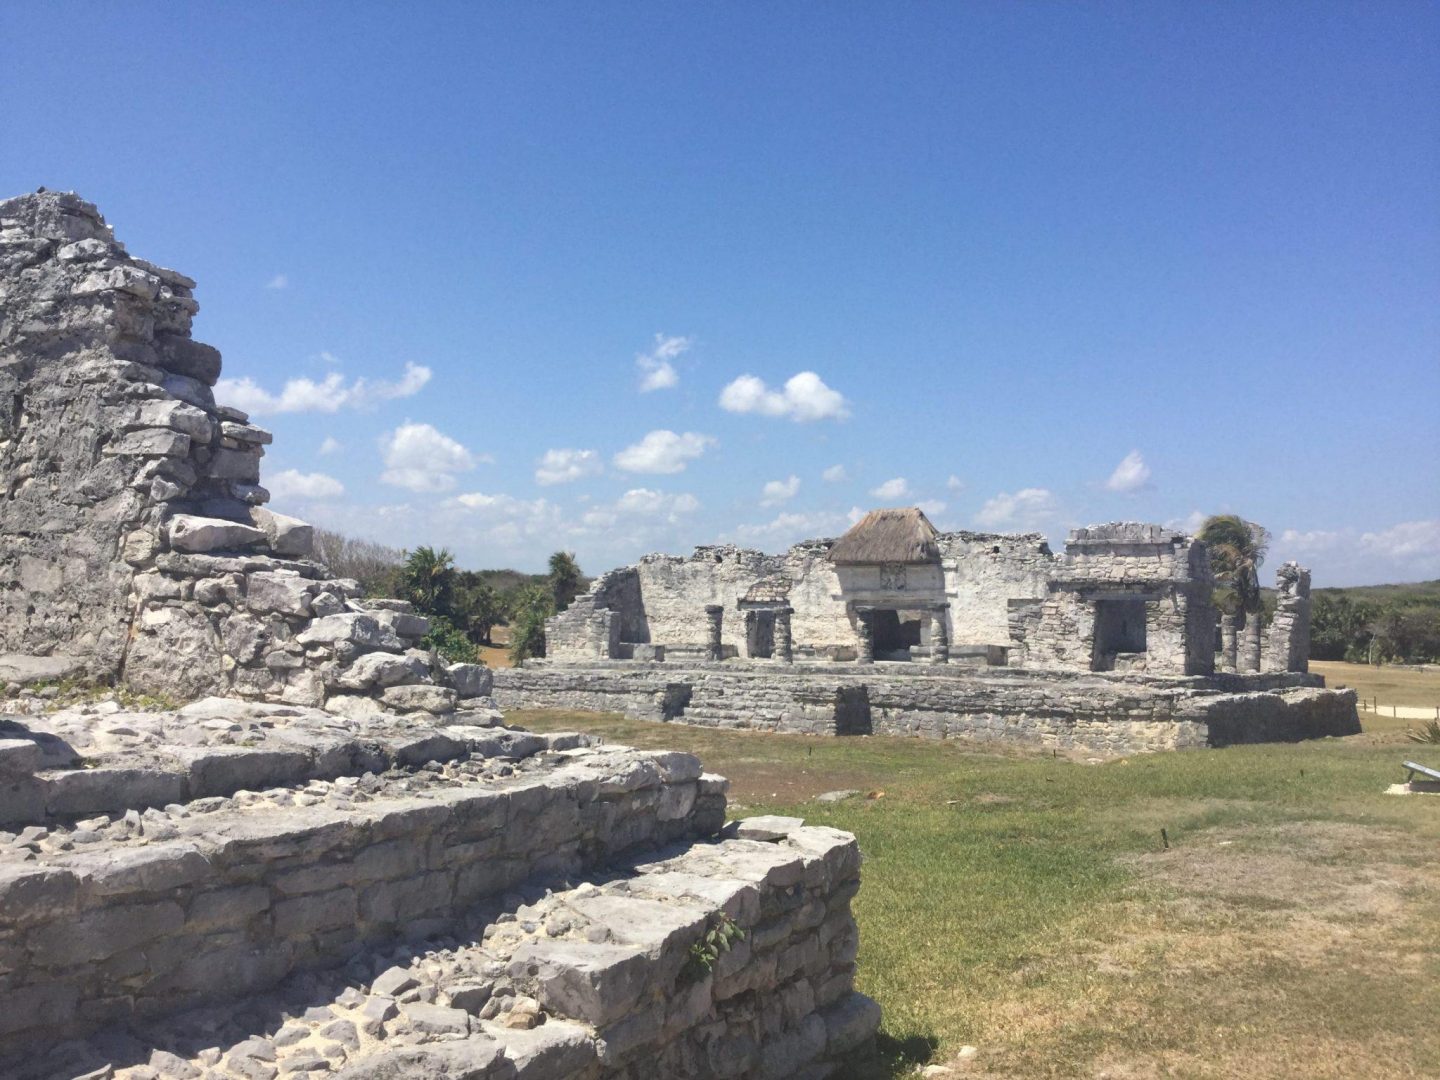 How to see the Mayan Ruins in Tulum Mexico